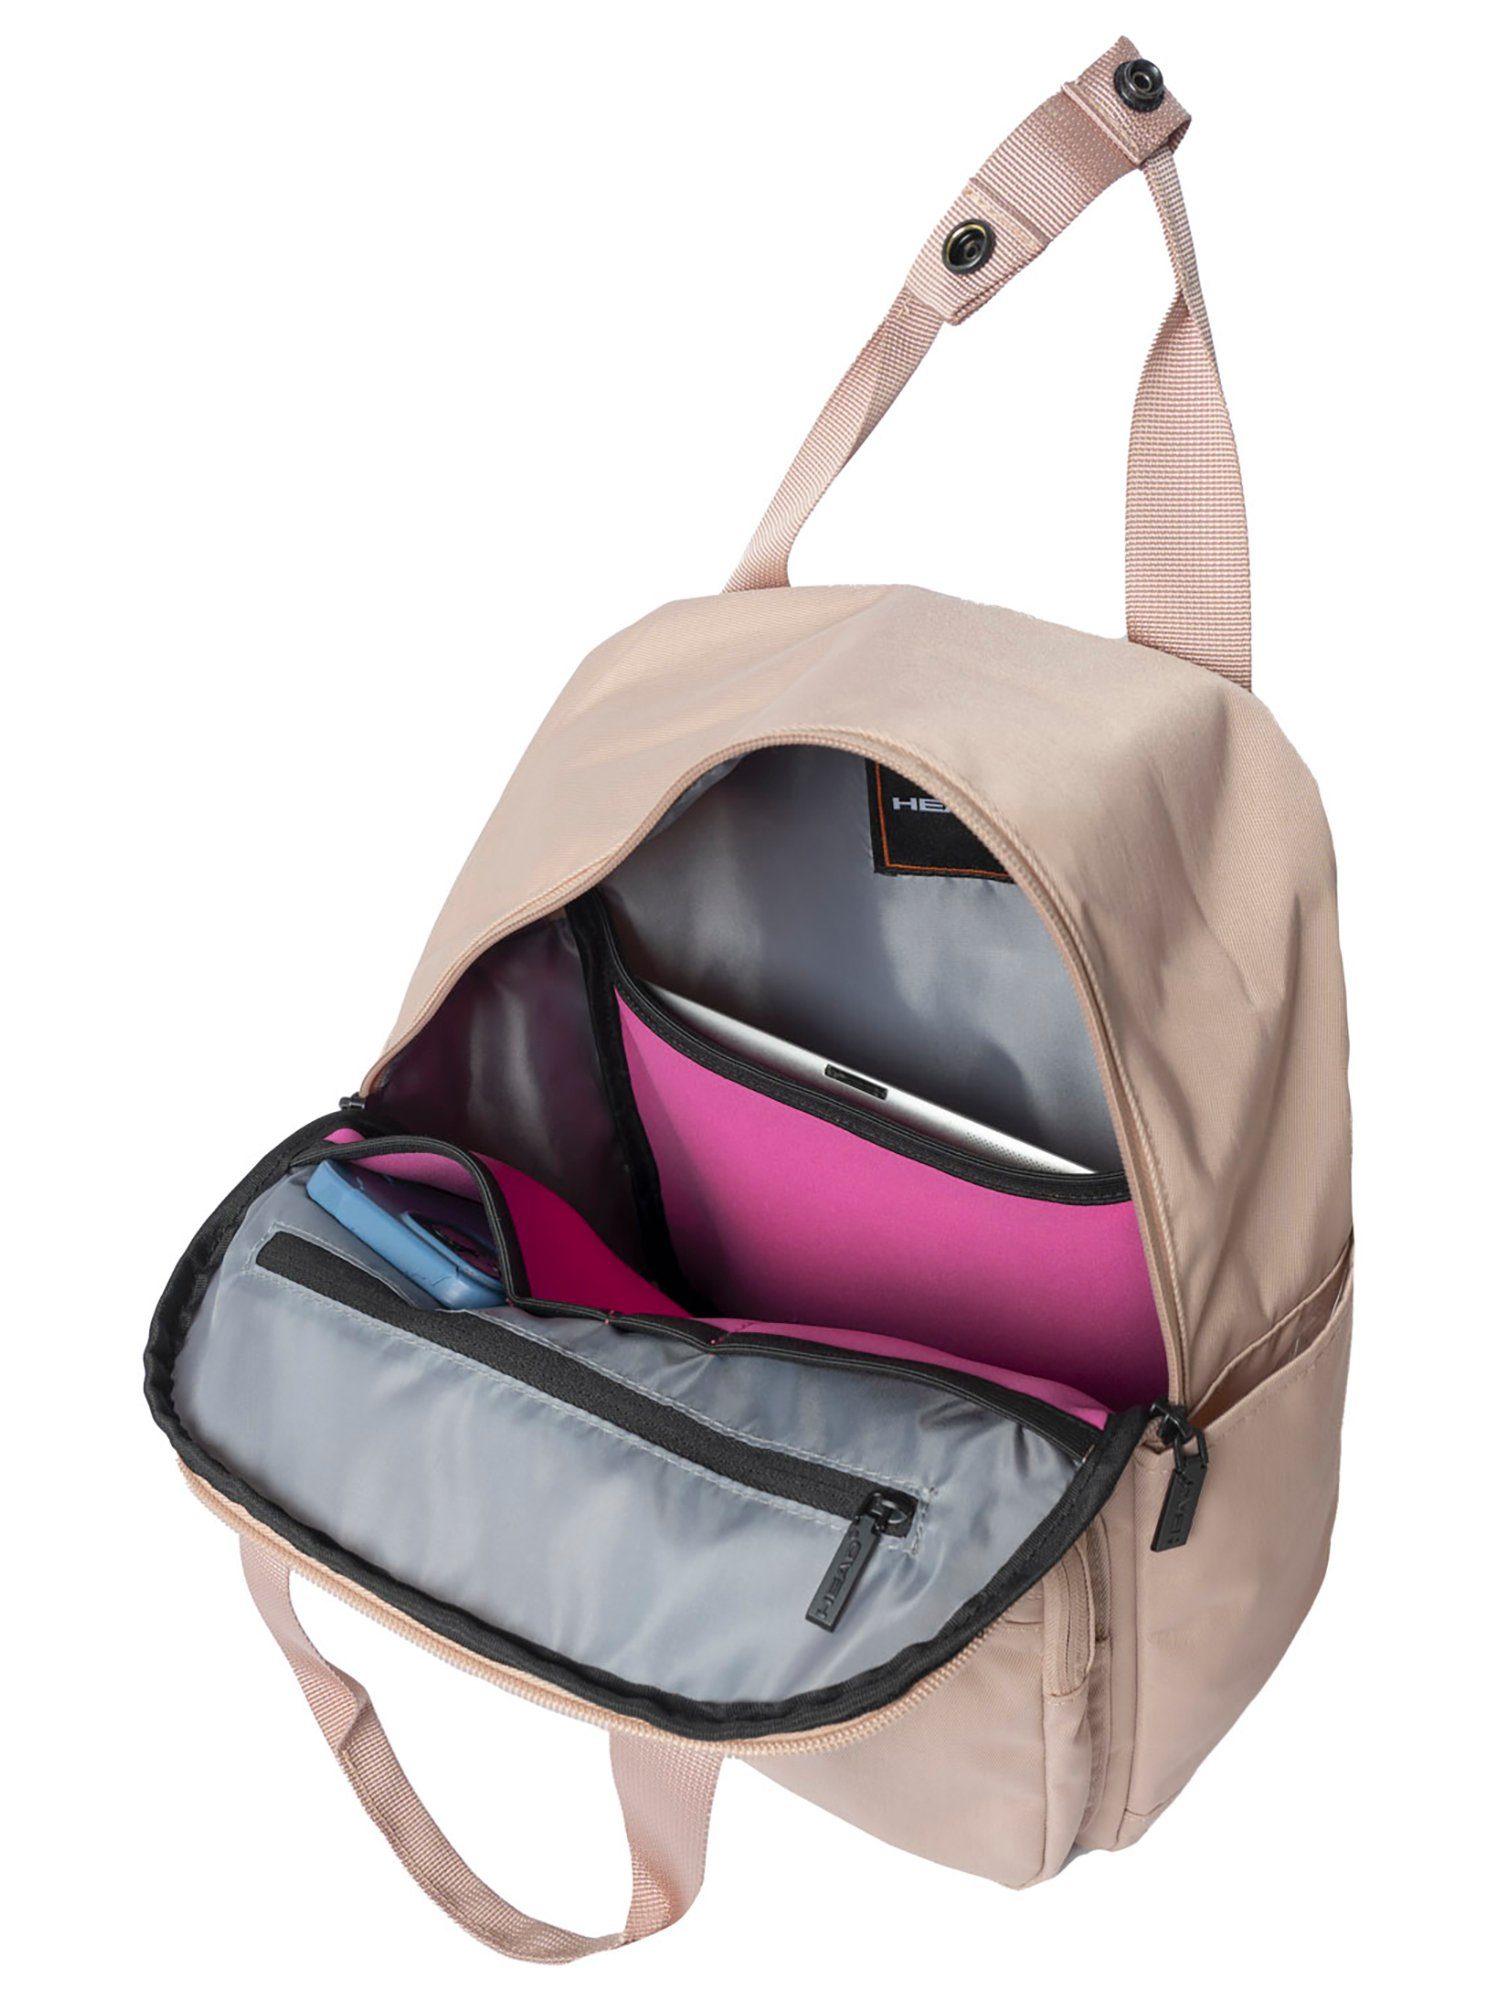 Rucksack Small Head Backpack Alley Rosa